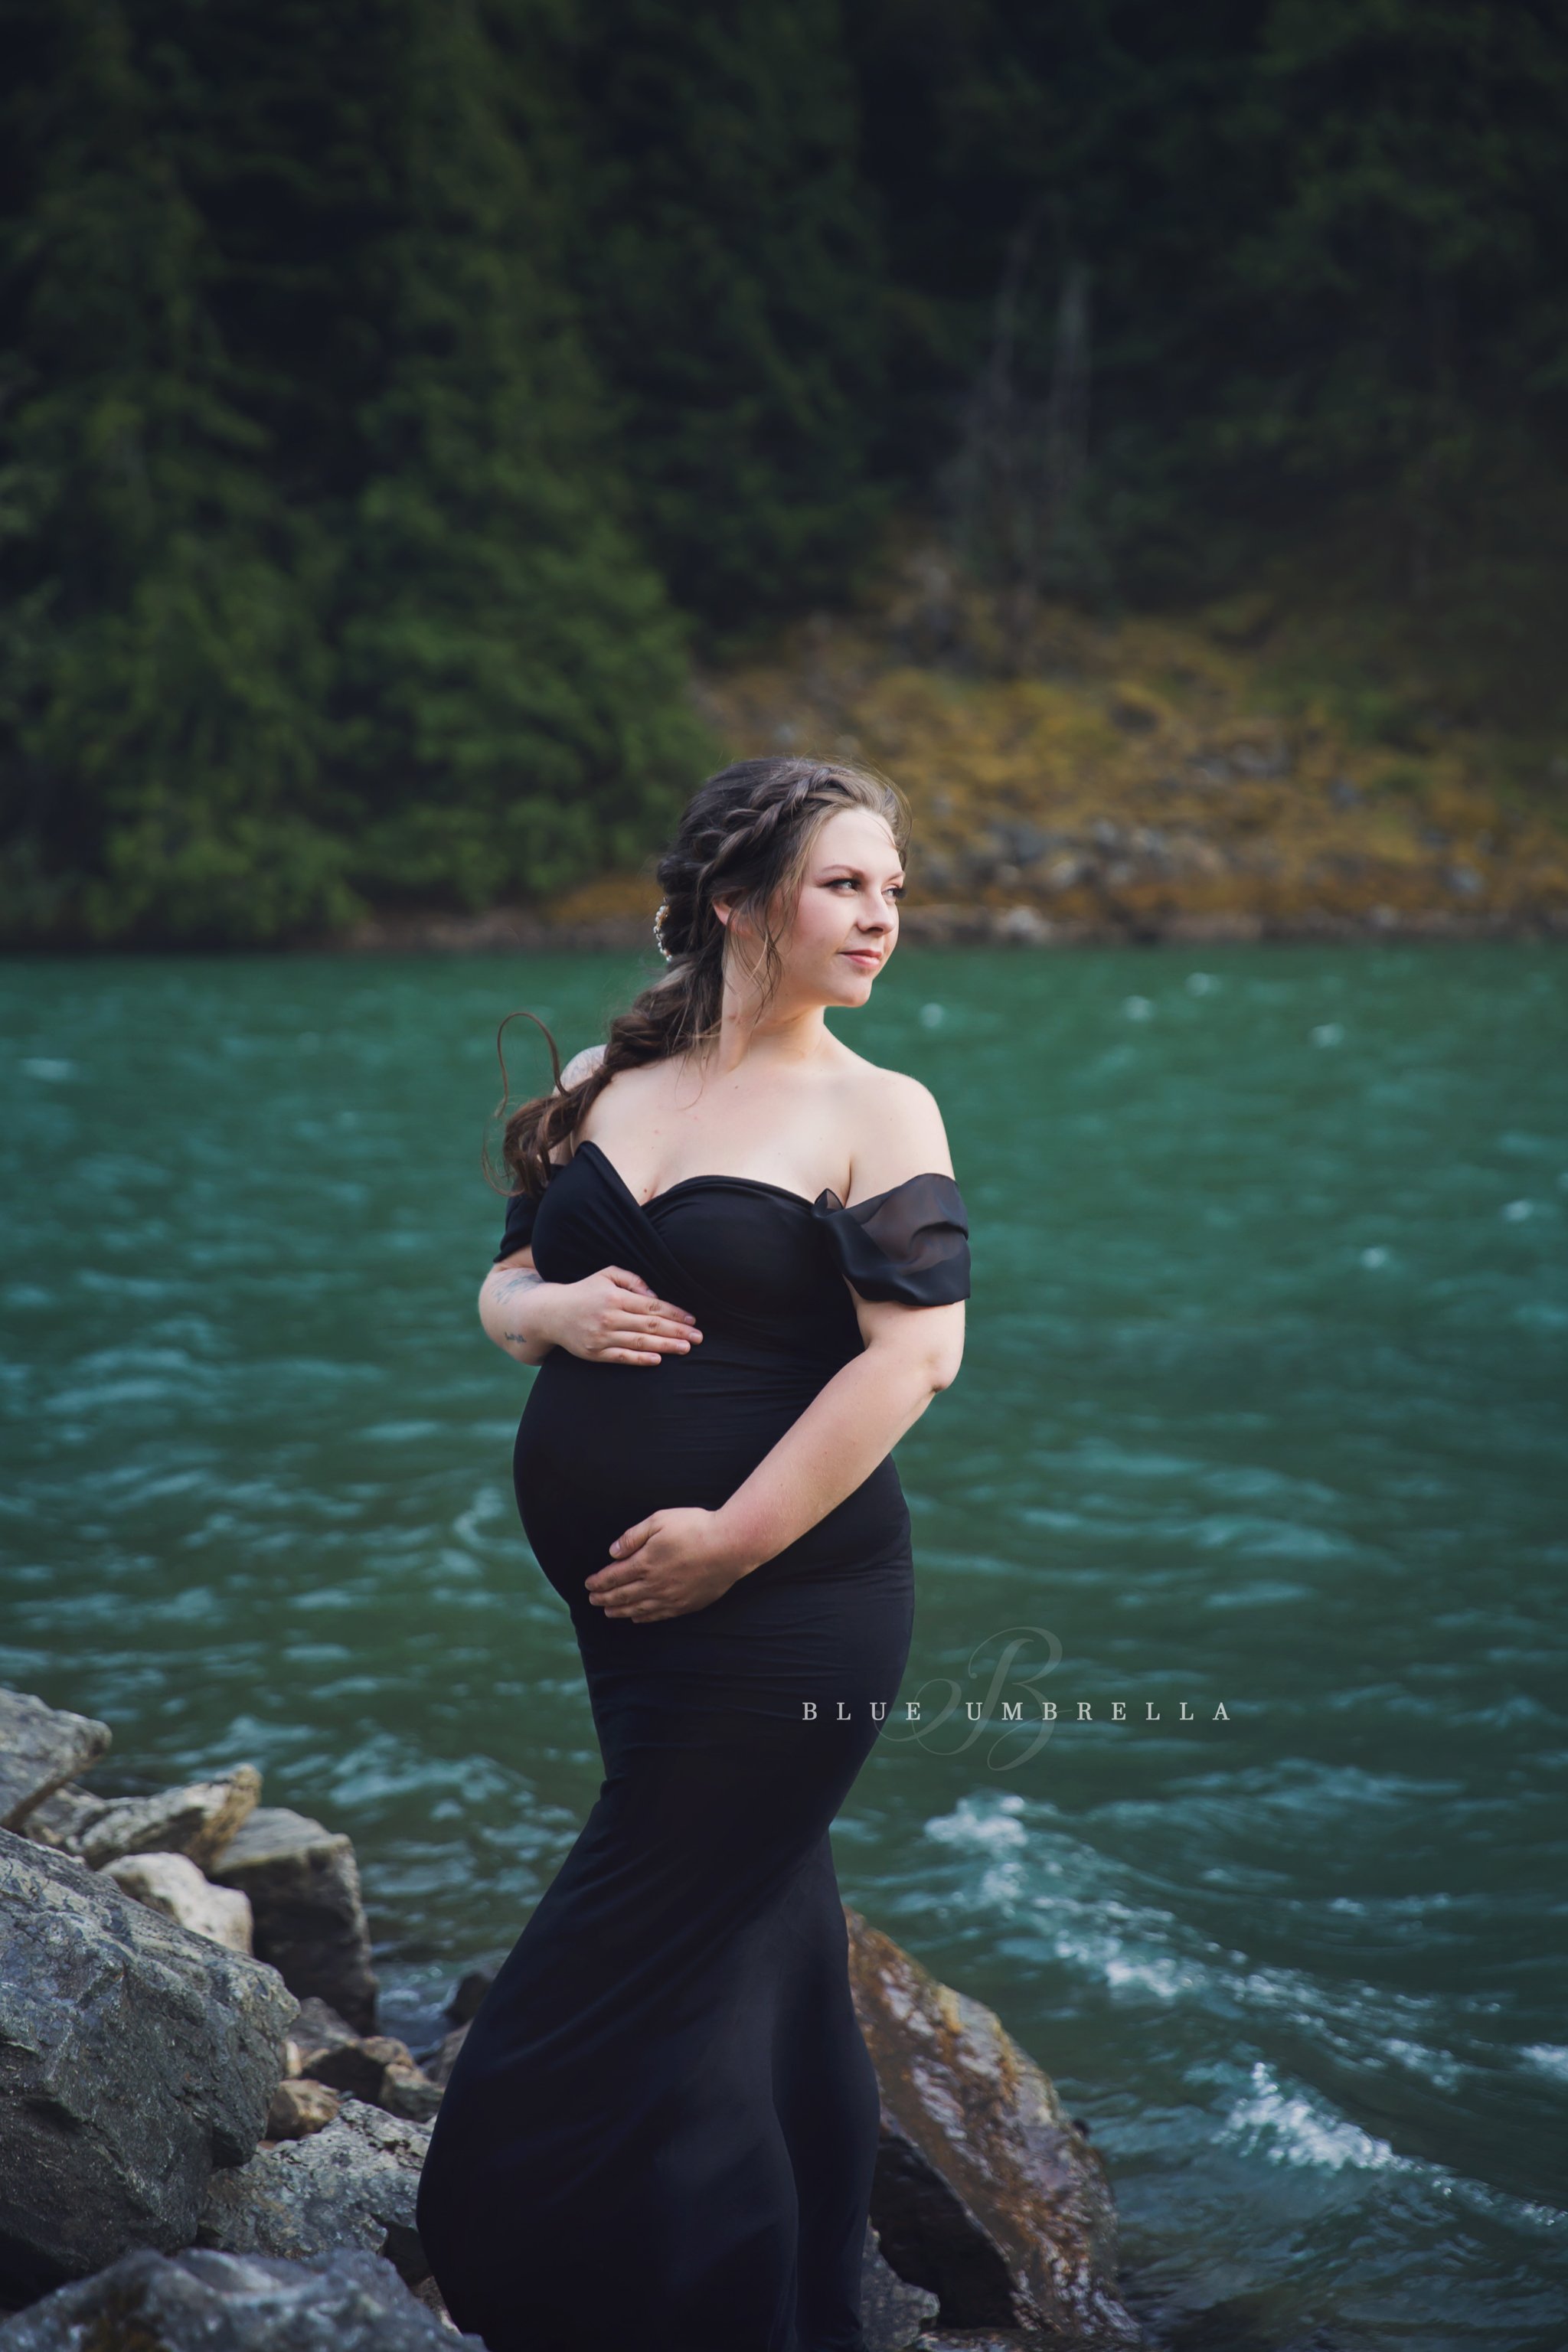 Pregnancy Photoshoot idea - Pair Rustic Locations With Formal Attire image 